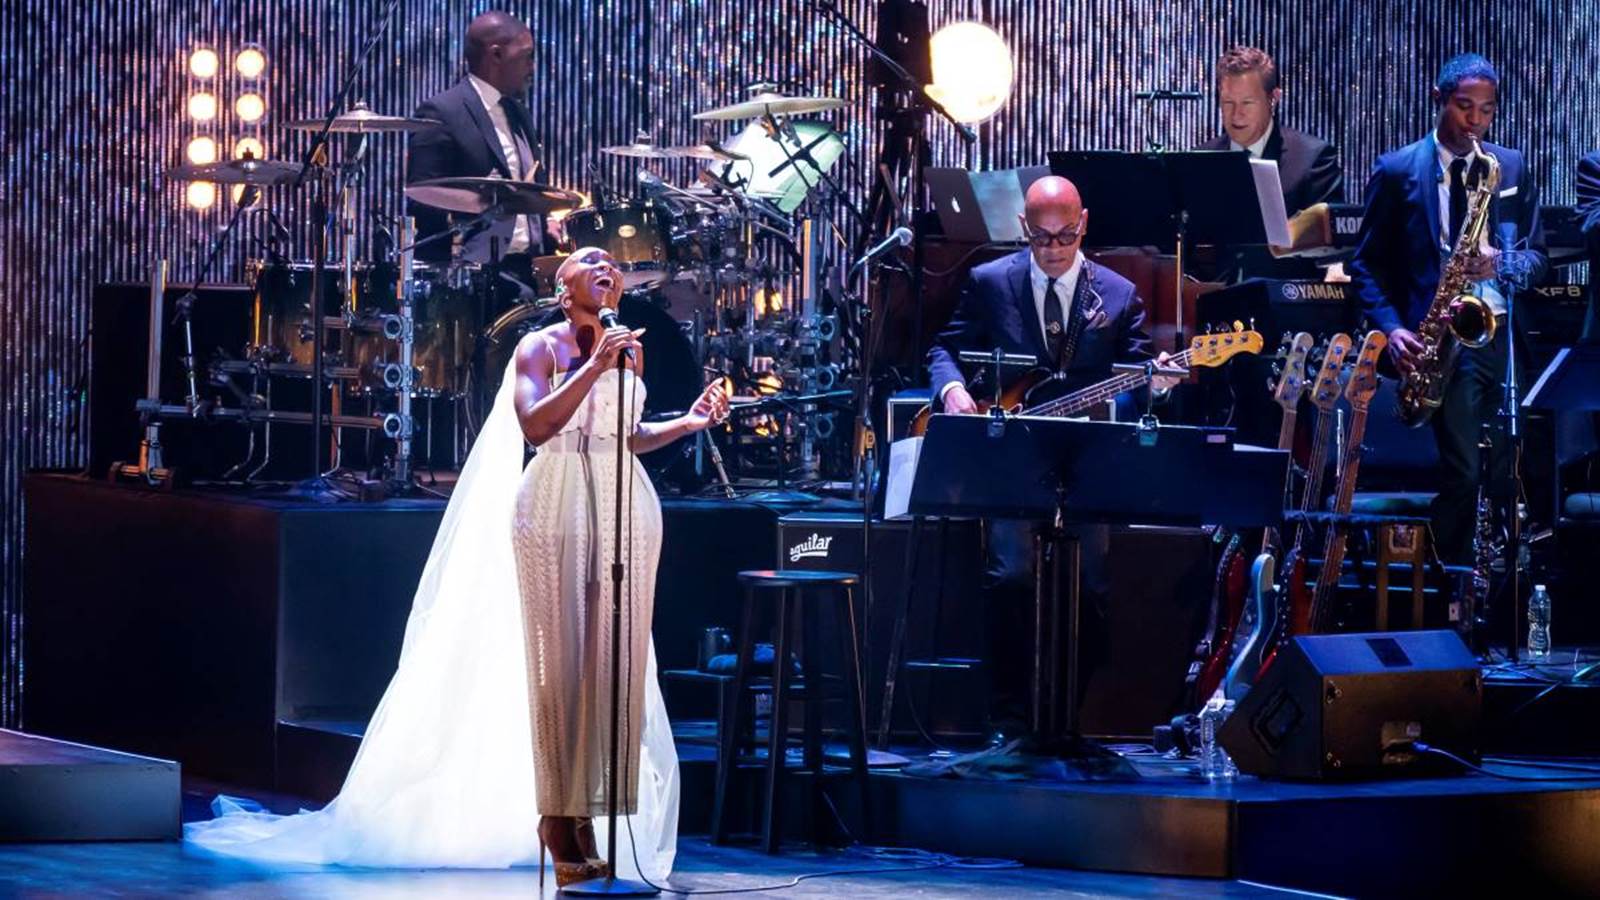 Cynthia Erivo sings on stage with a band.